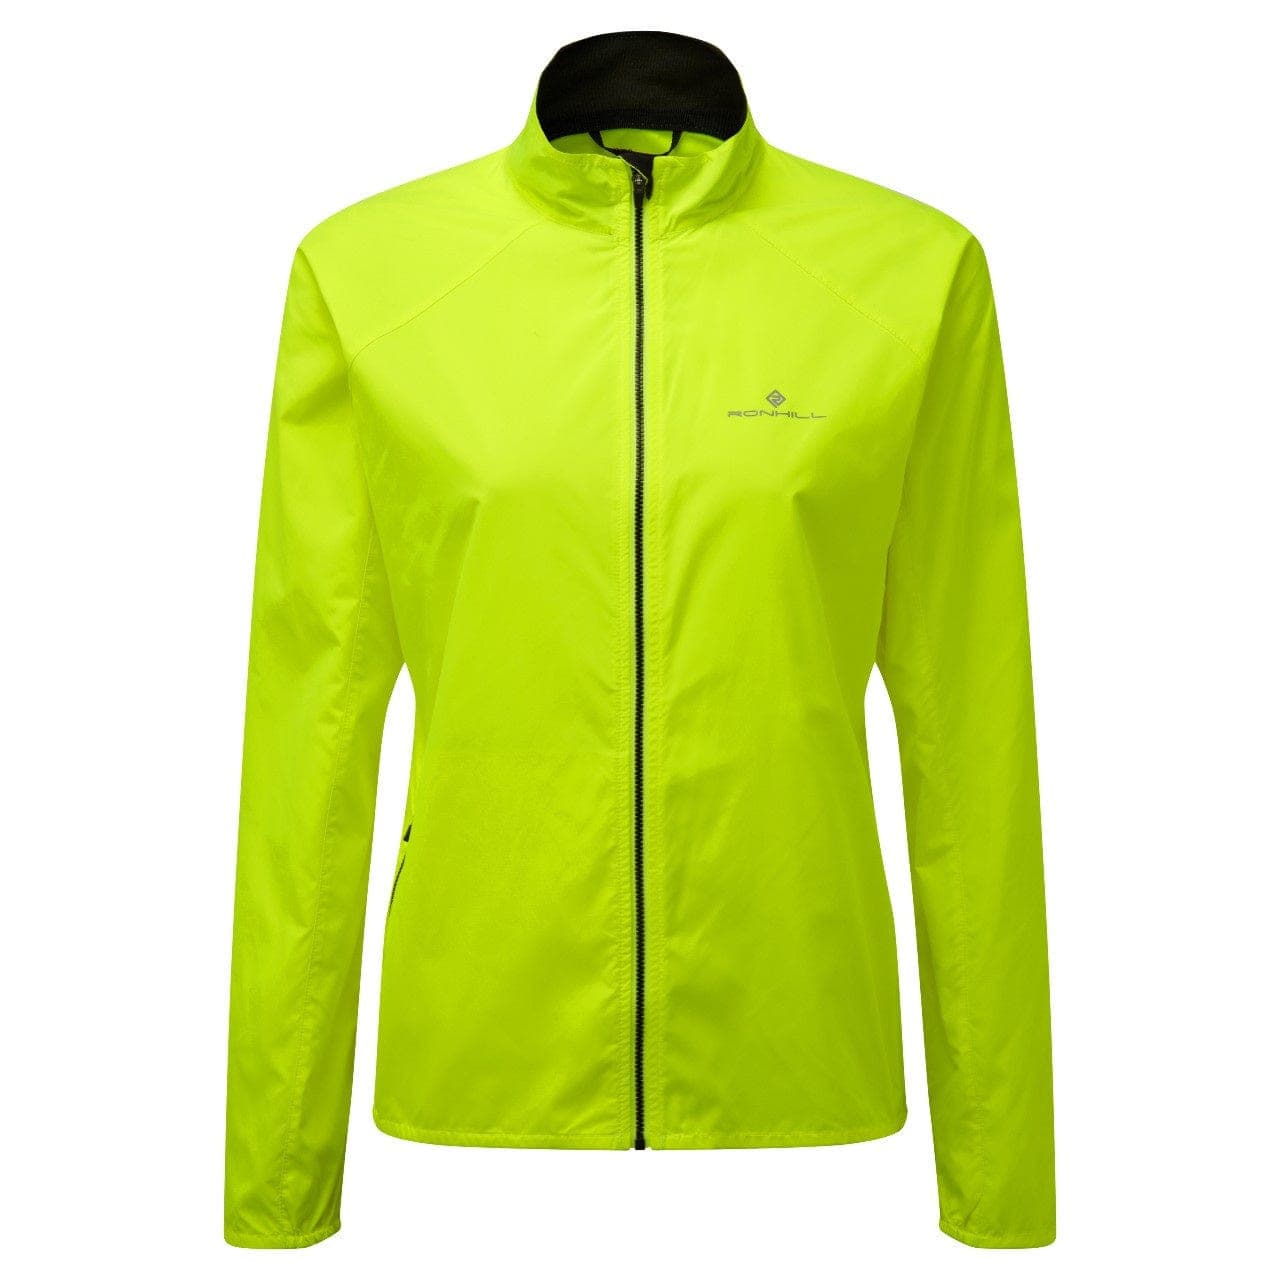 Ronhill Core Jacket (Womens) - Fluo Yellow